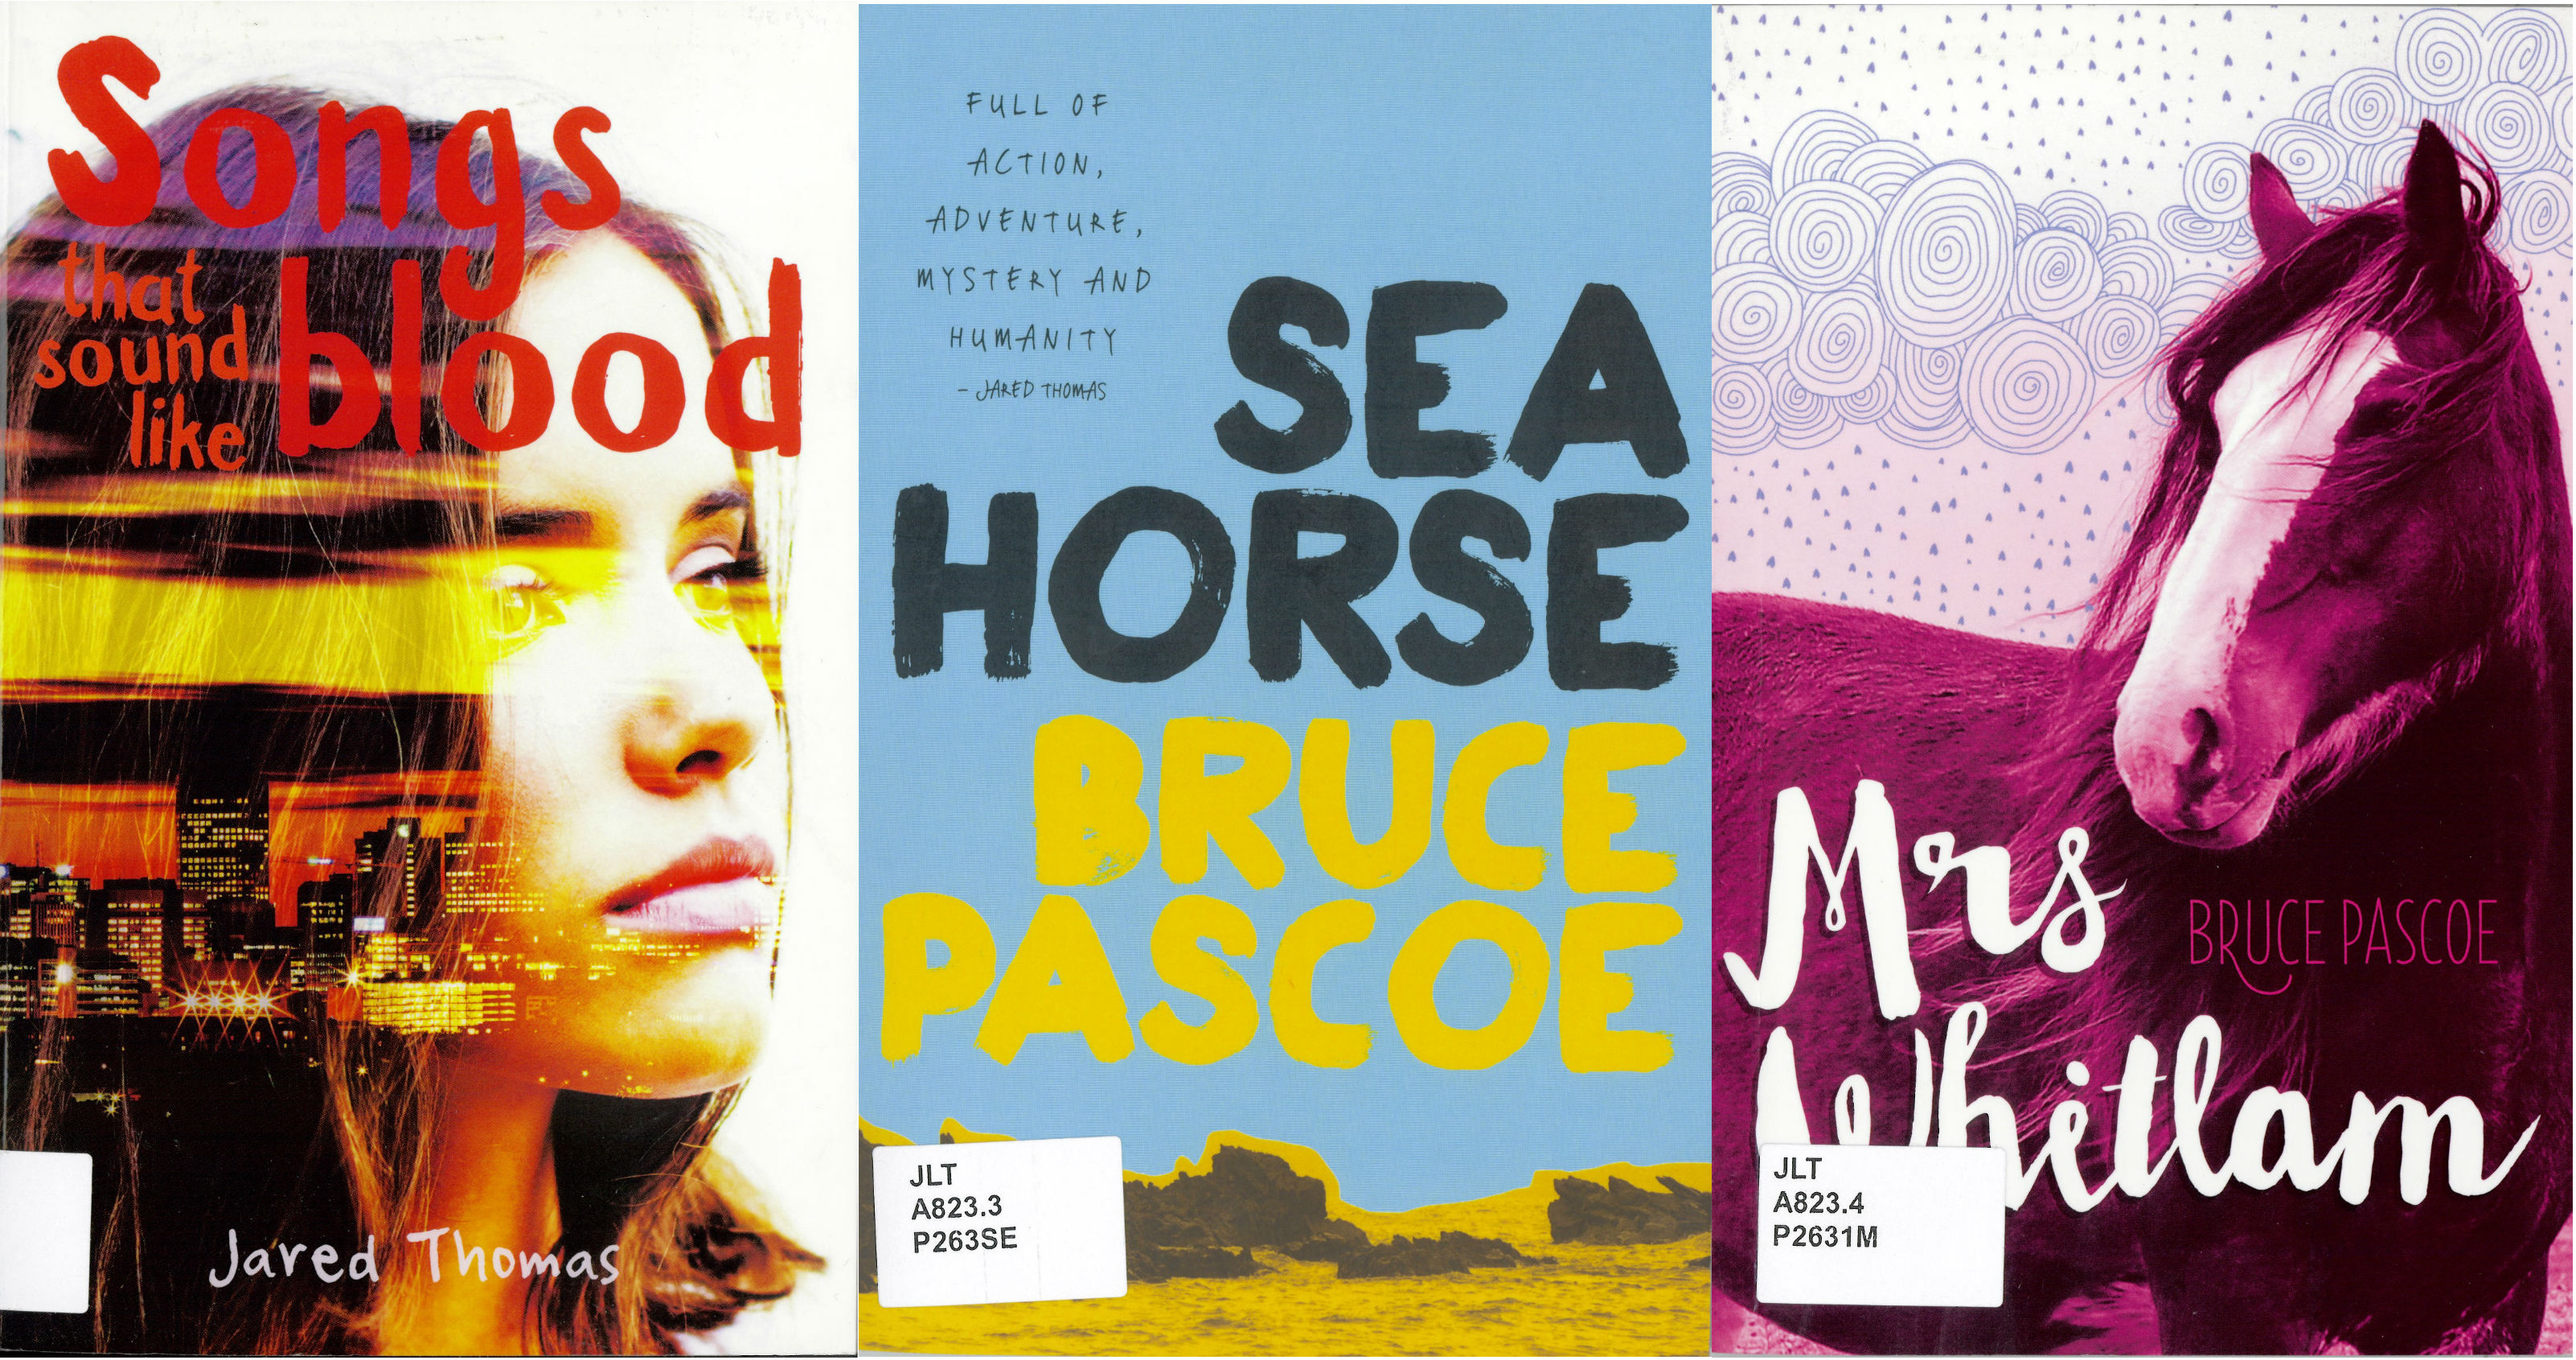 Songs that sound like blood by Jared Thomas, Seahorse by Bruce Pascoe, Mrs Whitlam by Bruce Pascoe